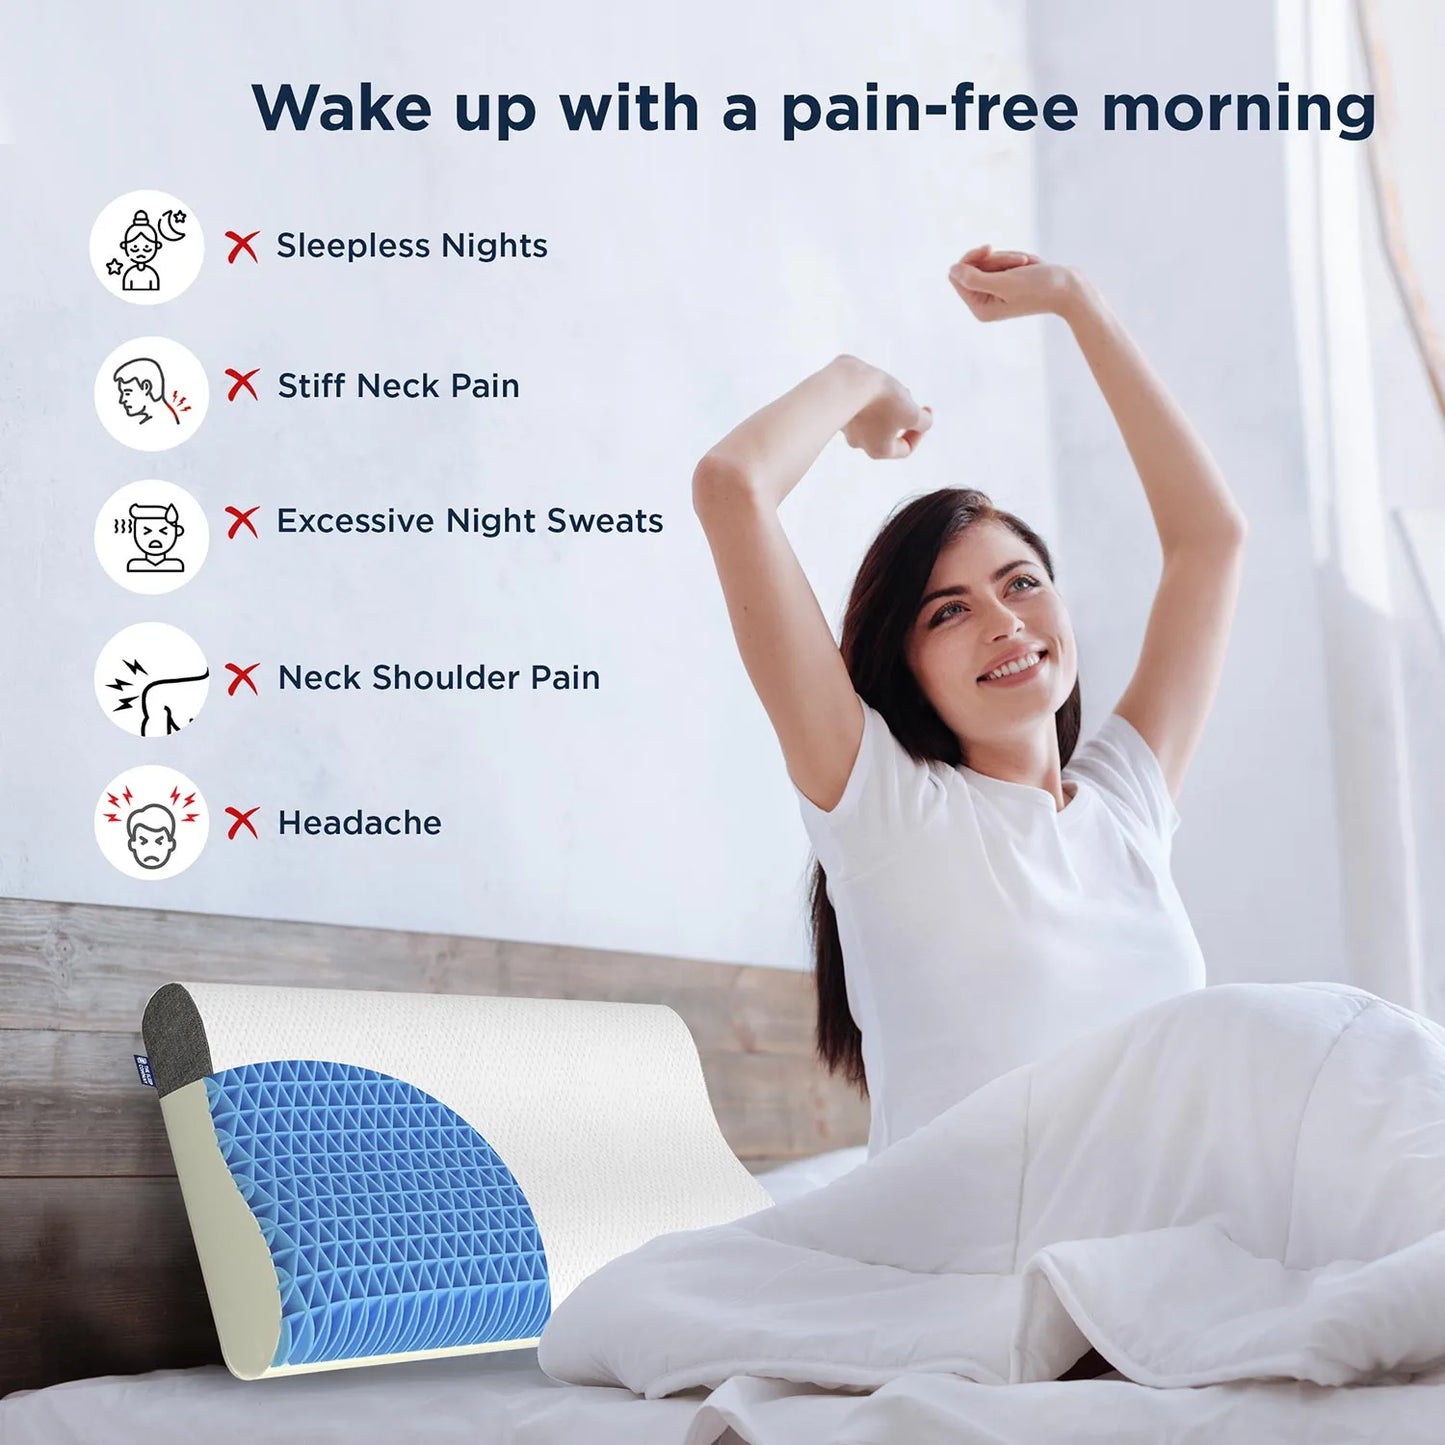 Wakeup with a pain-free morning 